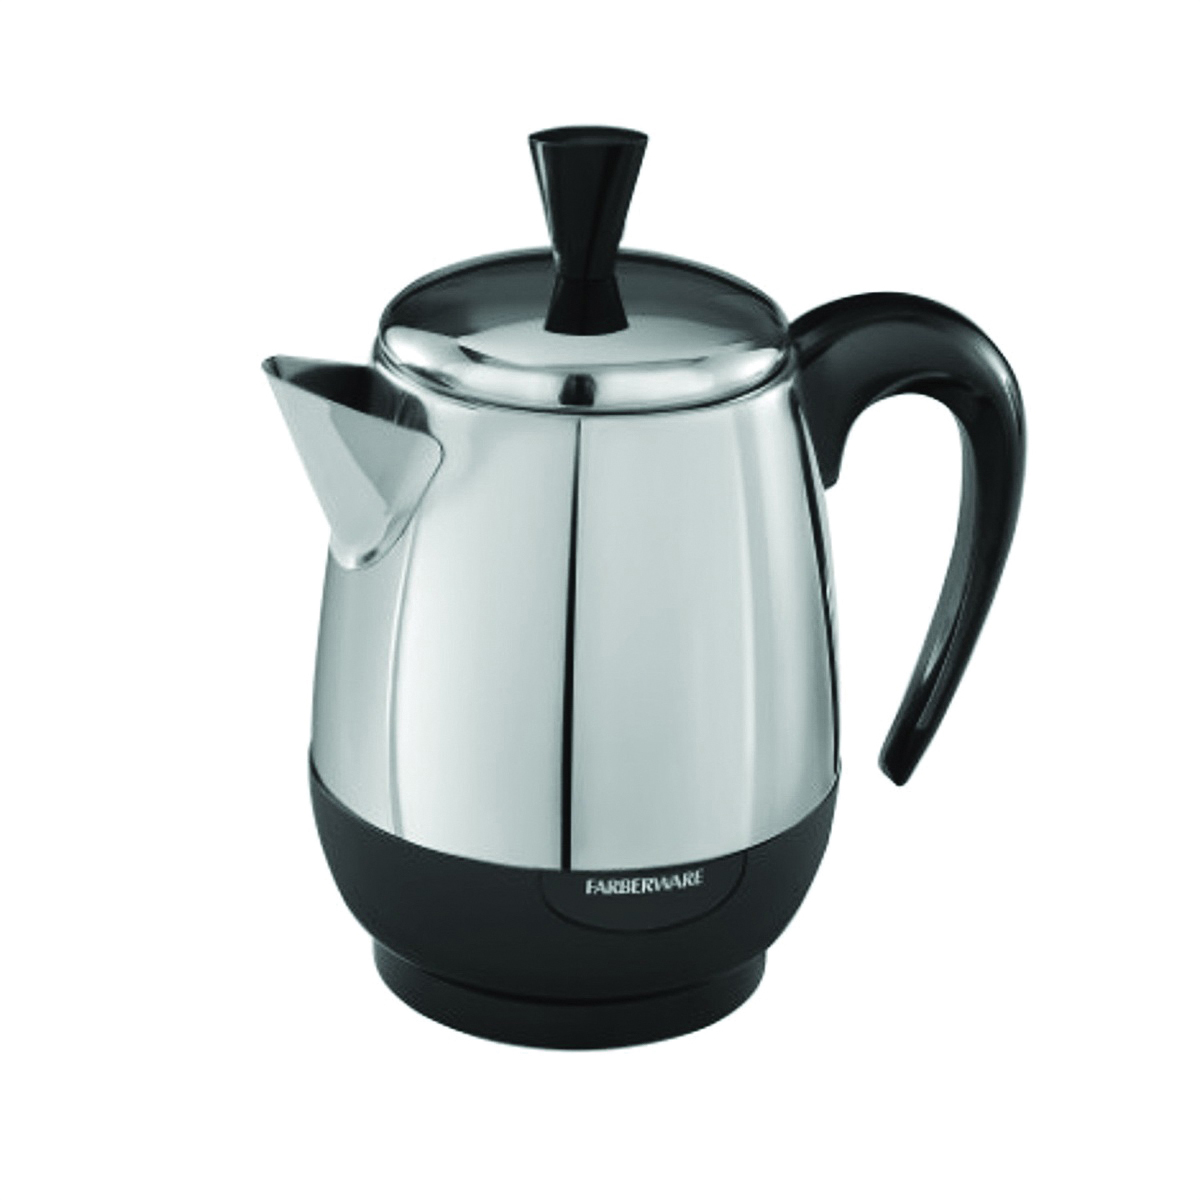 Farberware FCP240 Electric Percolator, 2 to 4 Cups, 1 W, Stainless Steel, Knob Control - 1